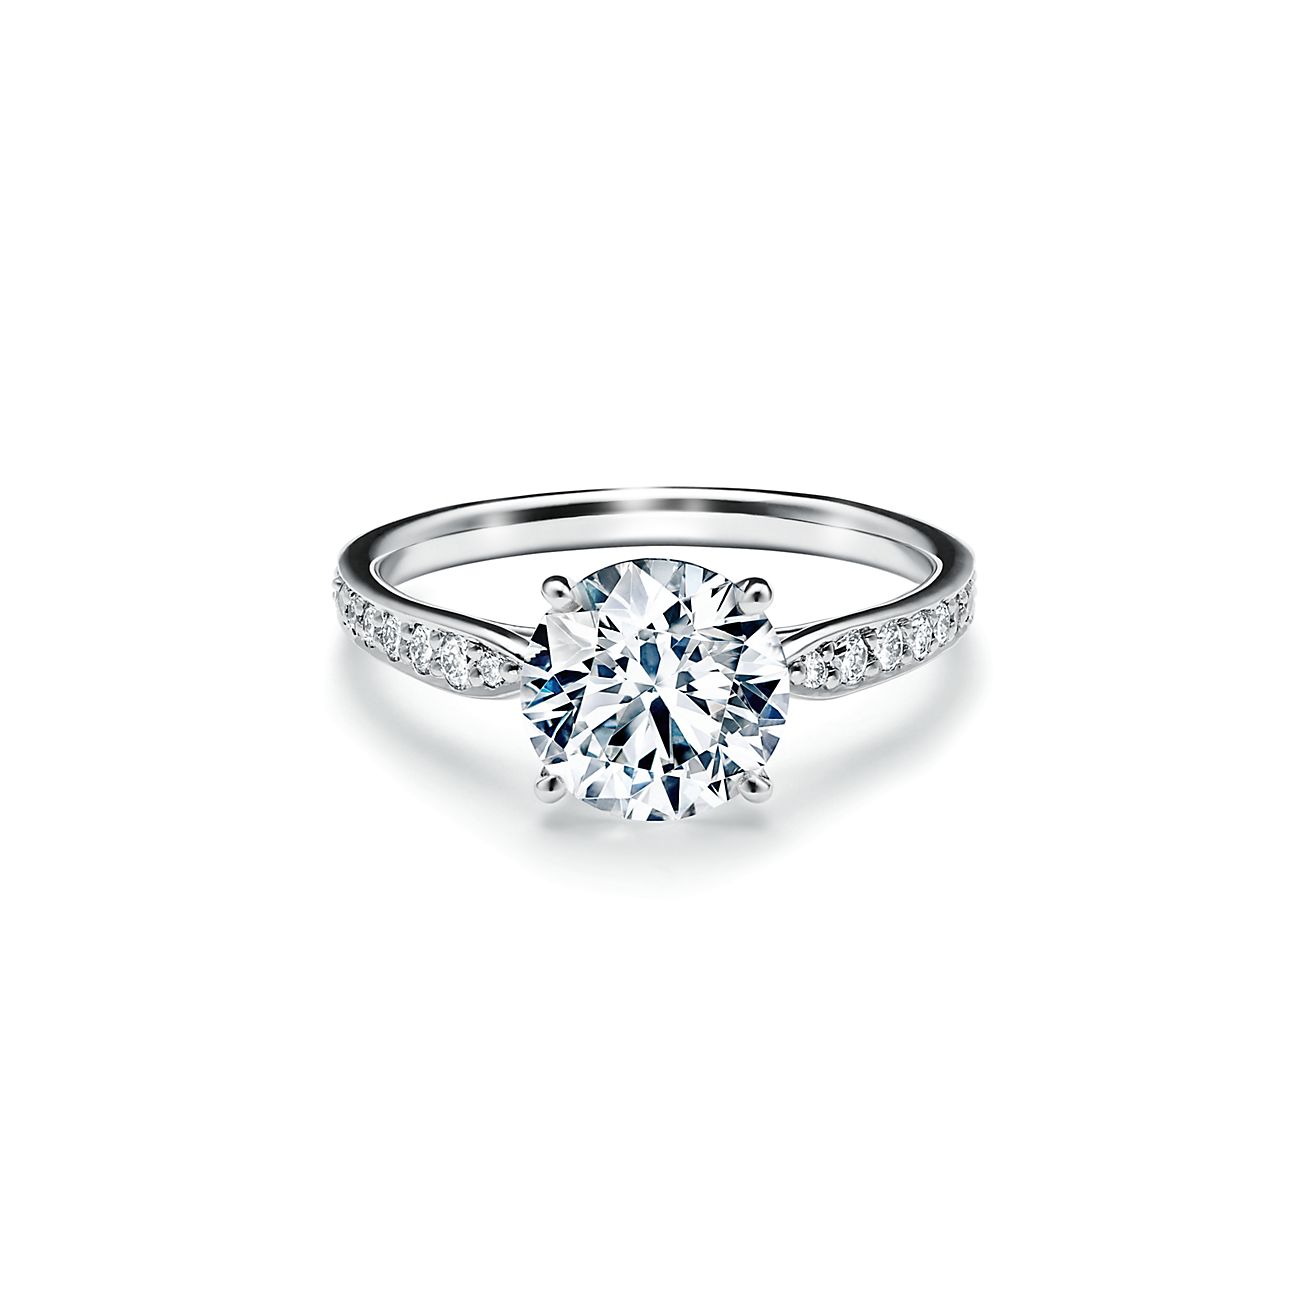 Tiffany Harmony Round Brilliant Engagement Ring With A Diamond Platinum Band It was sung by aarsh benipal, featuring aarsh benipal. round brilliant engagement ring with a